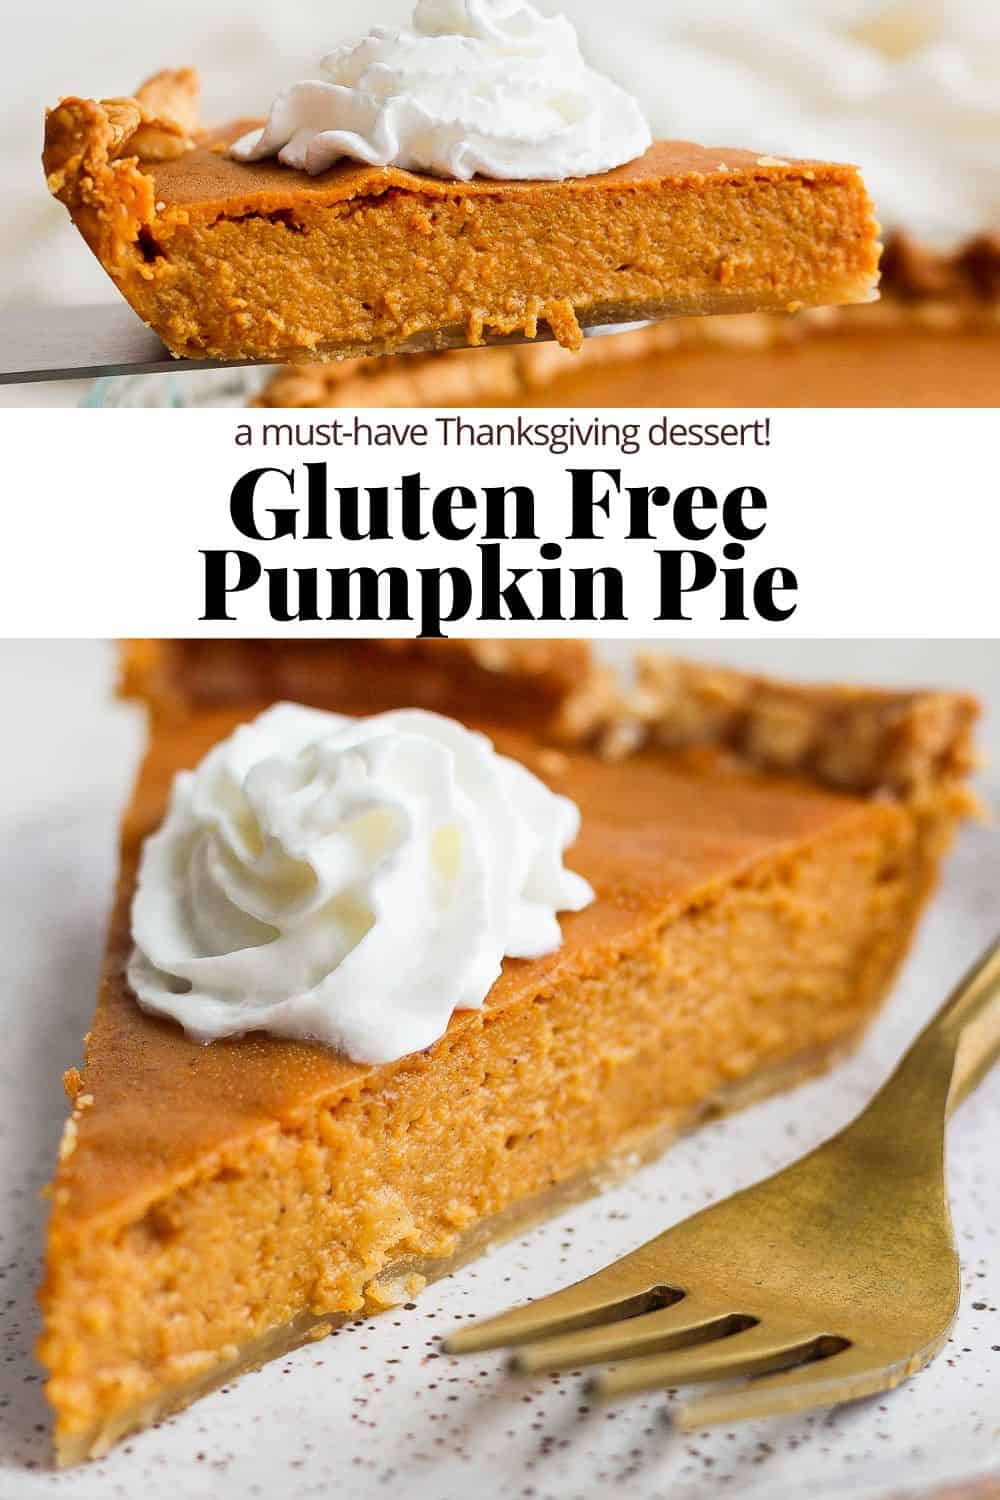 The pinterest image showing a single piece of gluten free pumpkin pie with a dollop of whip cream, the recipe title, and lastly a photo of a slice of pumpkin pie with a dollop of whip cream on a plate.